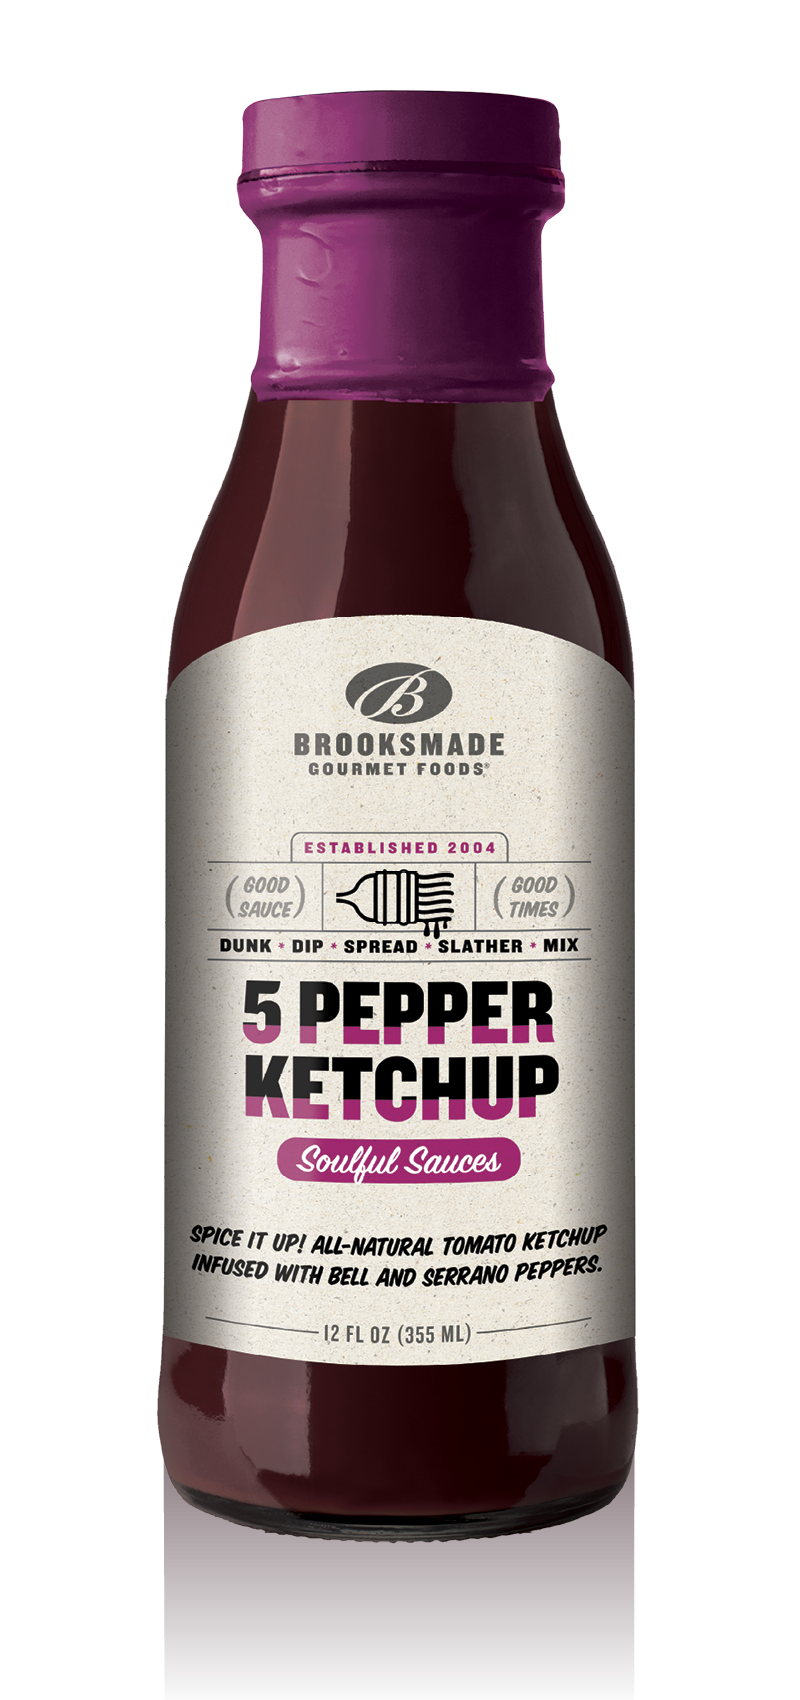 5 Pepper Ketchup, Gluten Free, No High Fructose Corn Syrup All-Natural Spicy Ketchup, Made with Organic Tomatoes 12 oz Unit